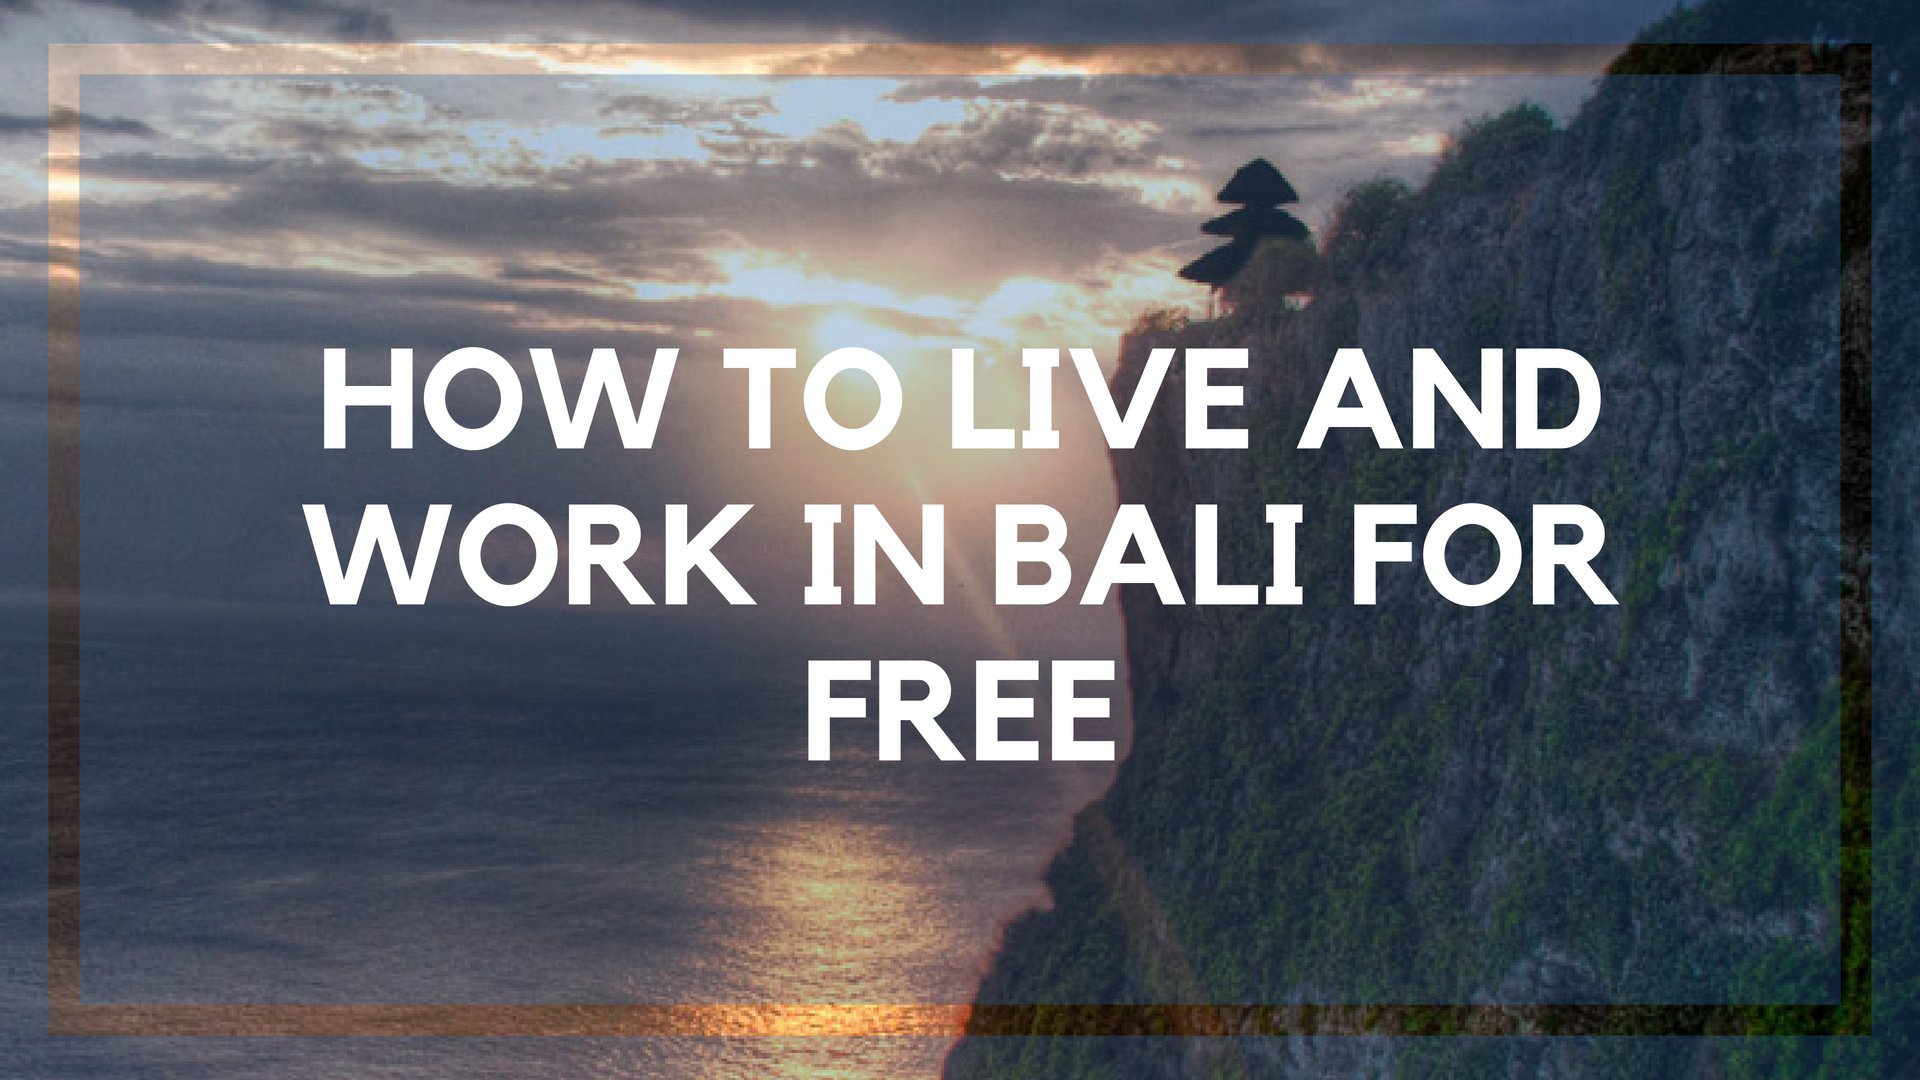 How to Live and Work In Bali for Free